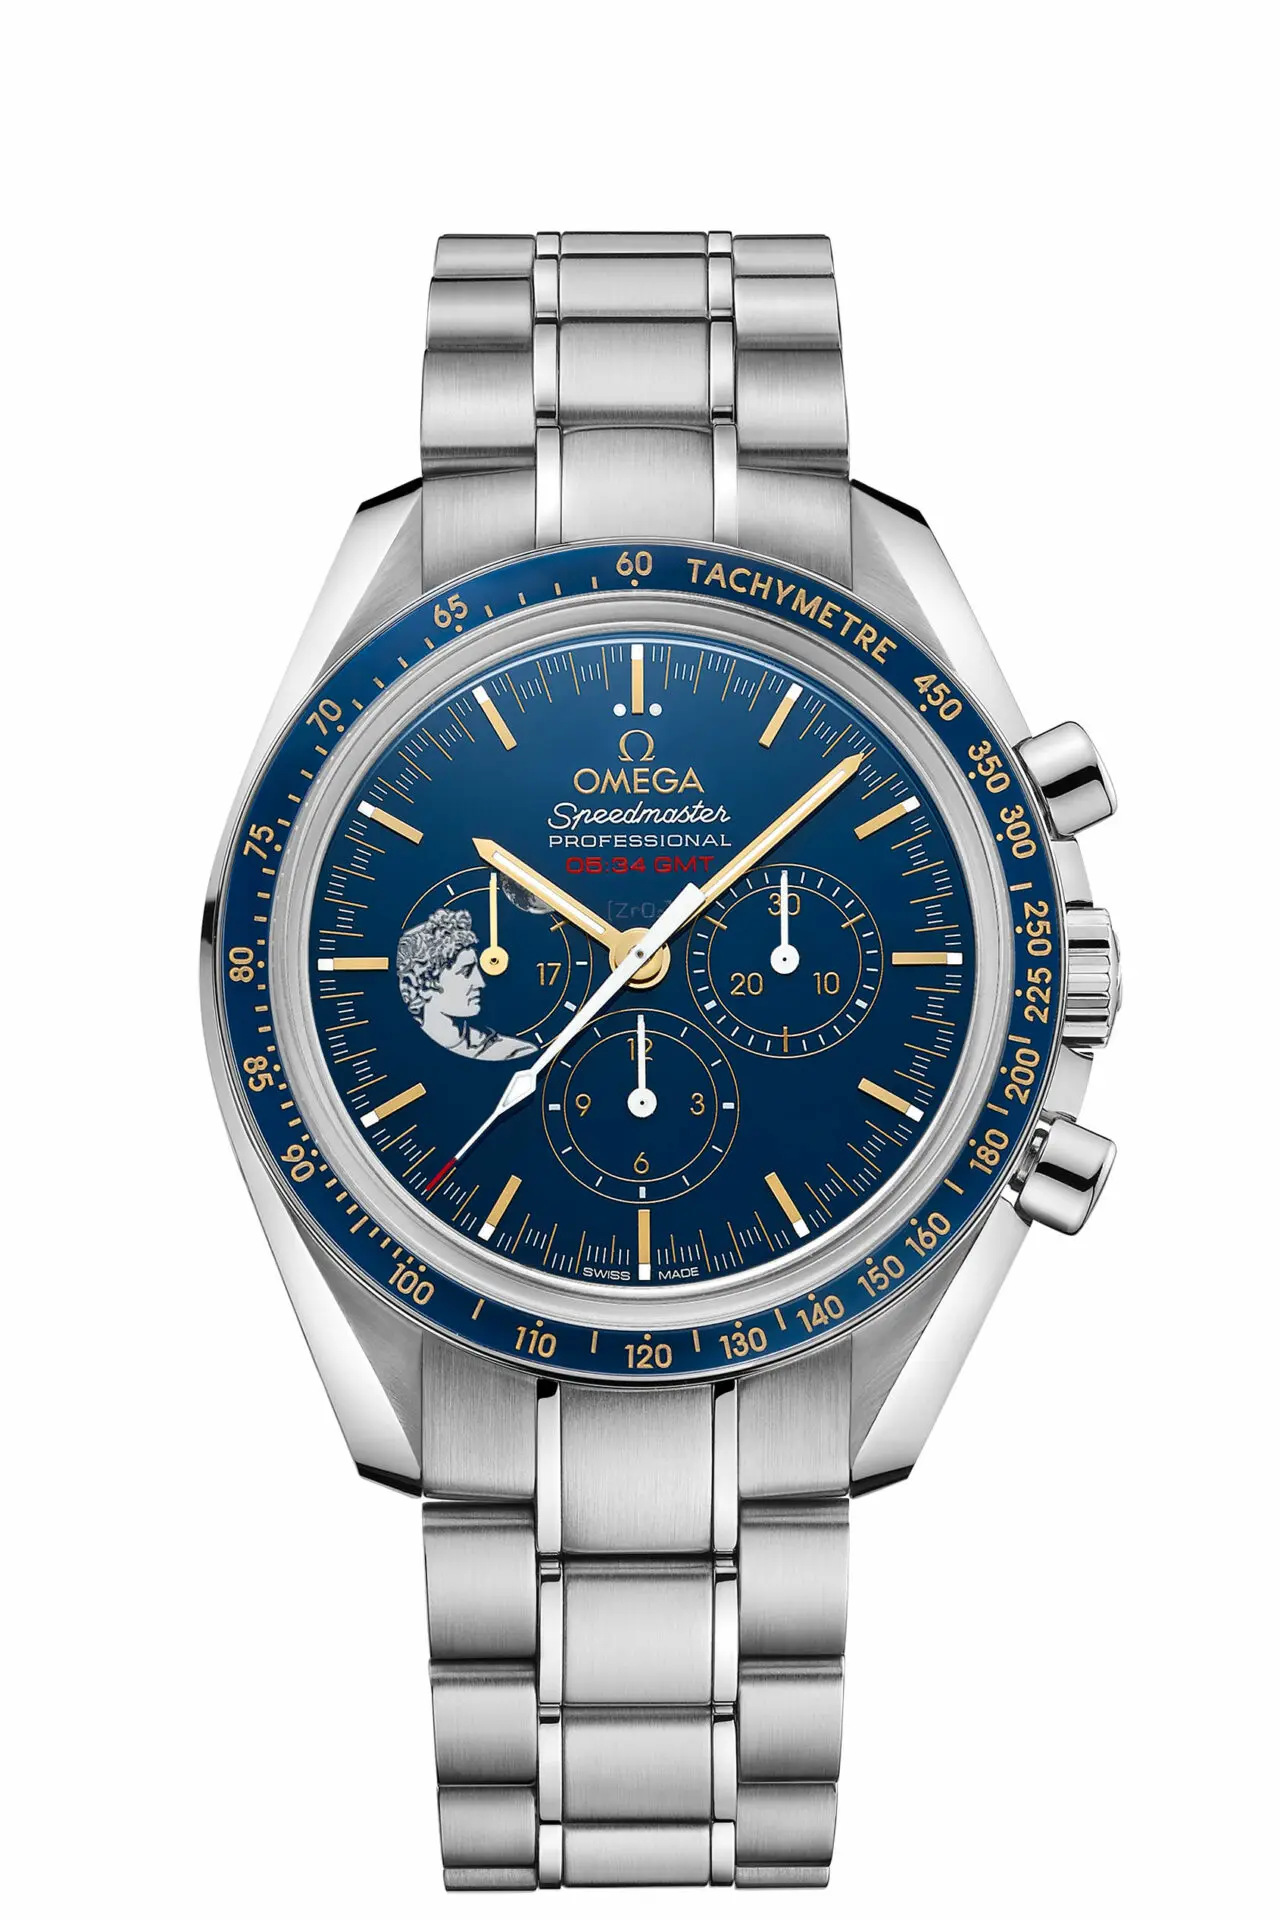 Speedmaster “Apollo XVII” Limited Edition Announced at Baselworld 2017